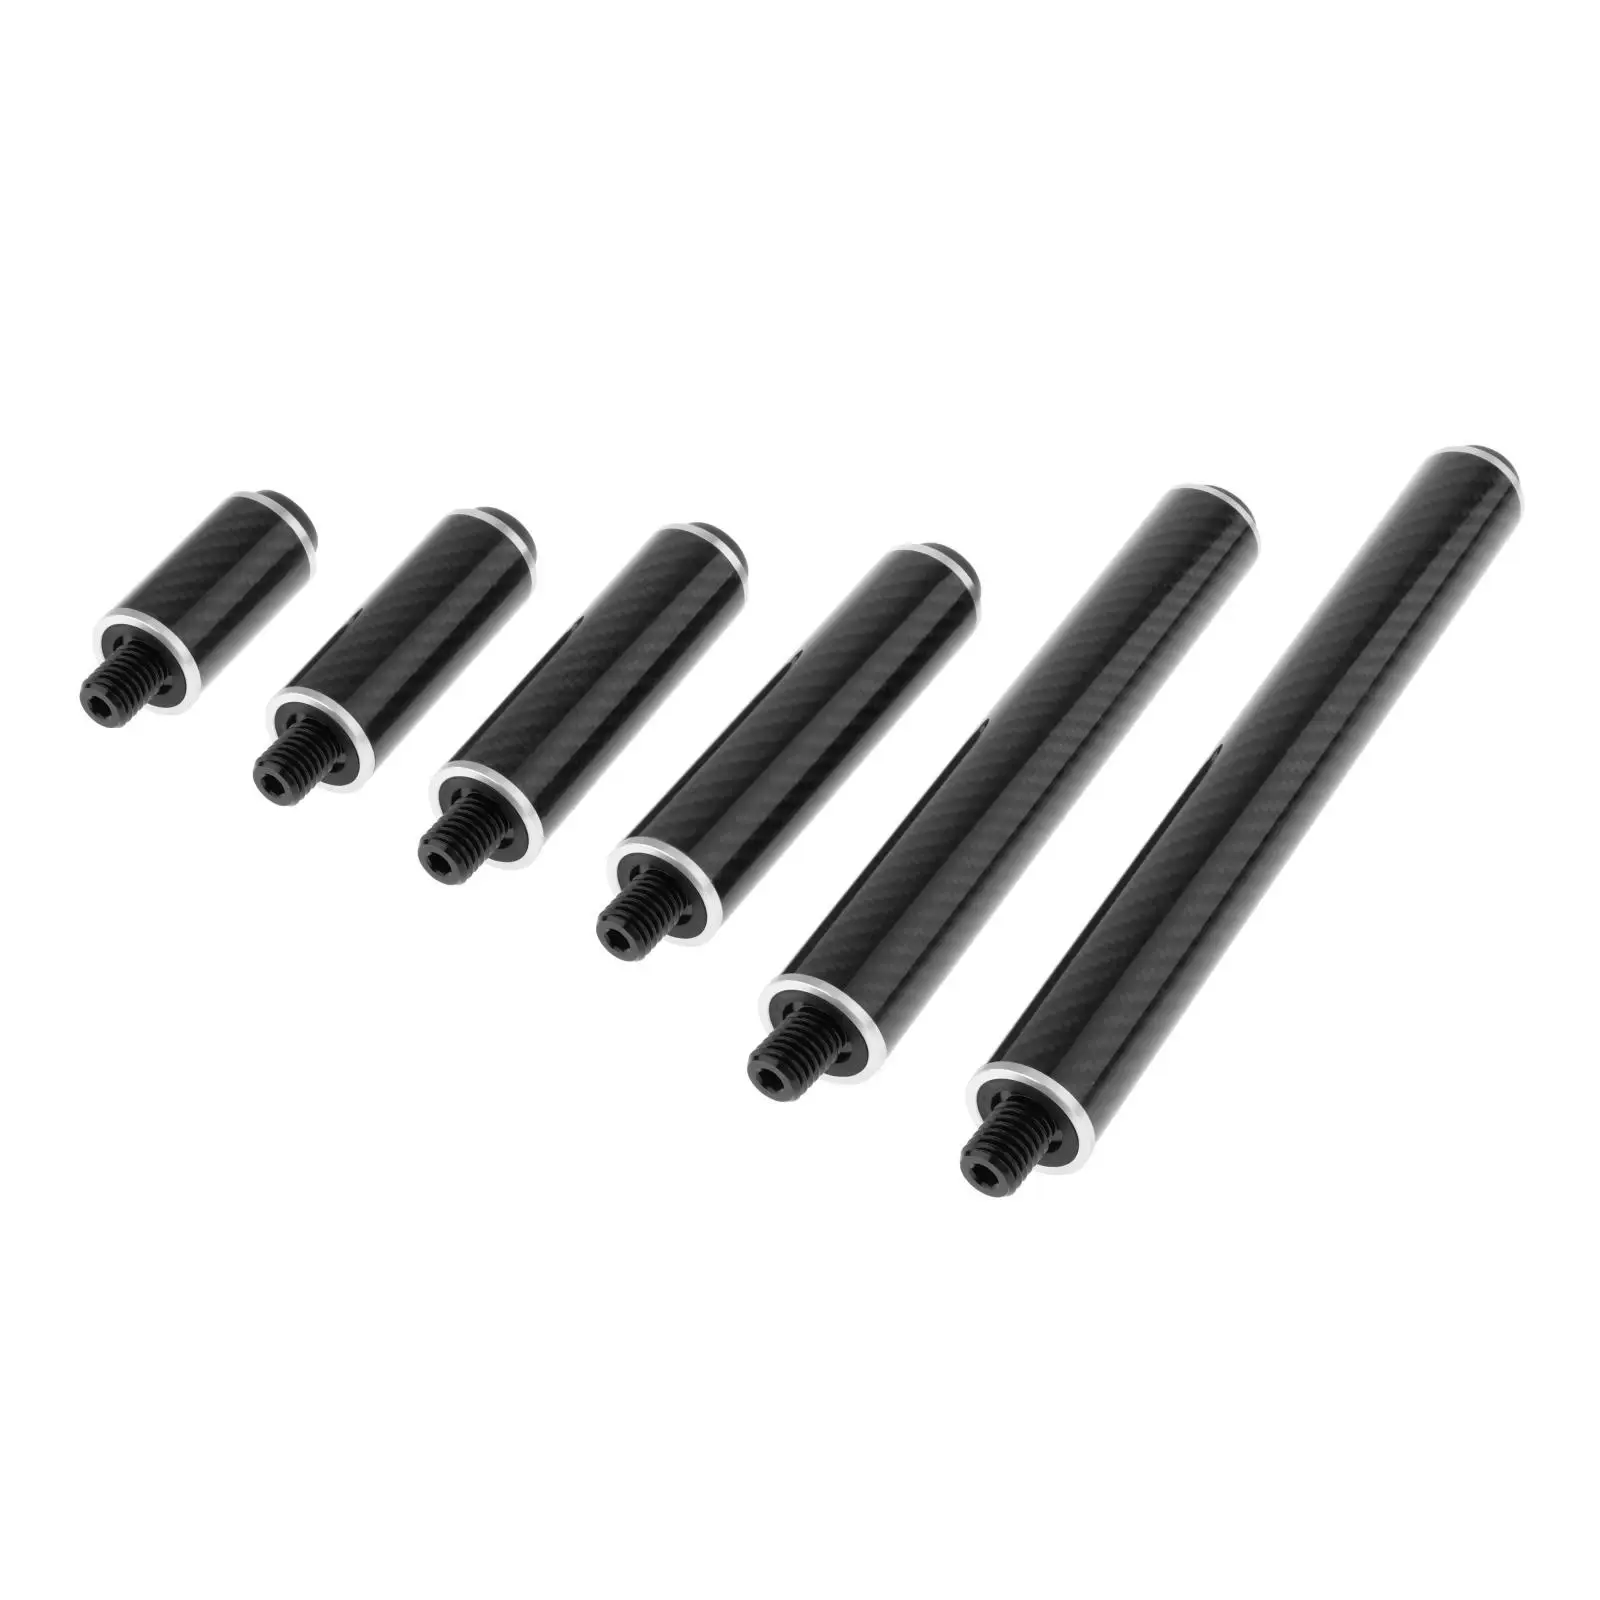 Billiards Pool Cue Extension Snooker Cue Extended Cue Butt End Lengthener for Athlete